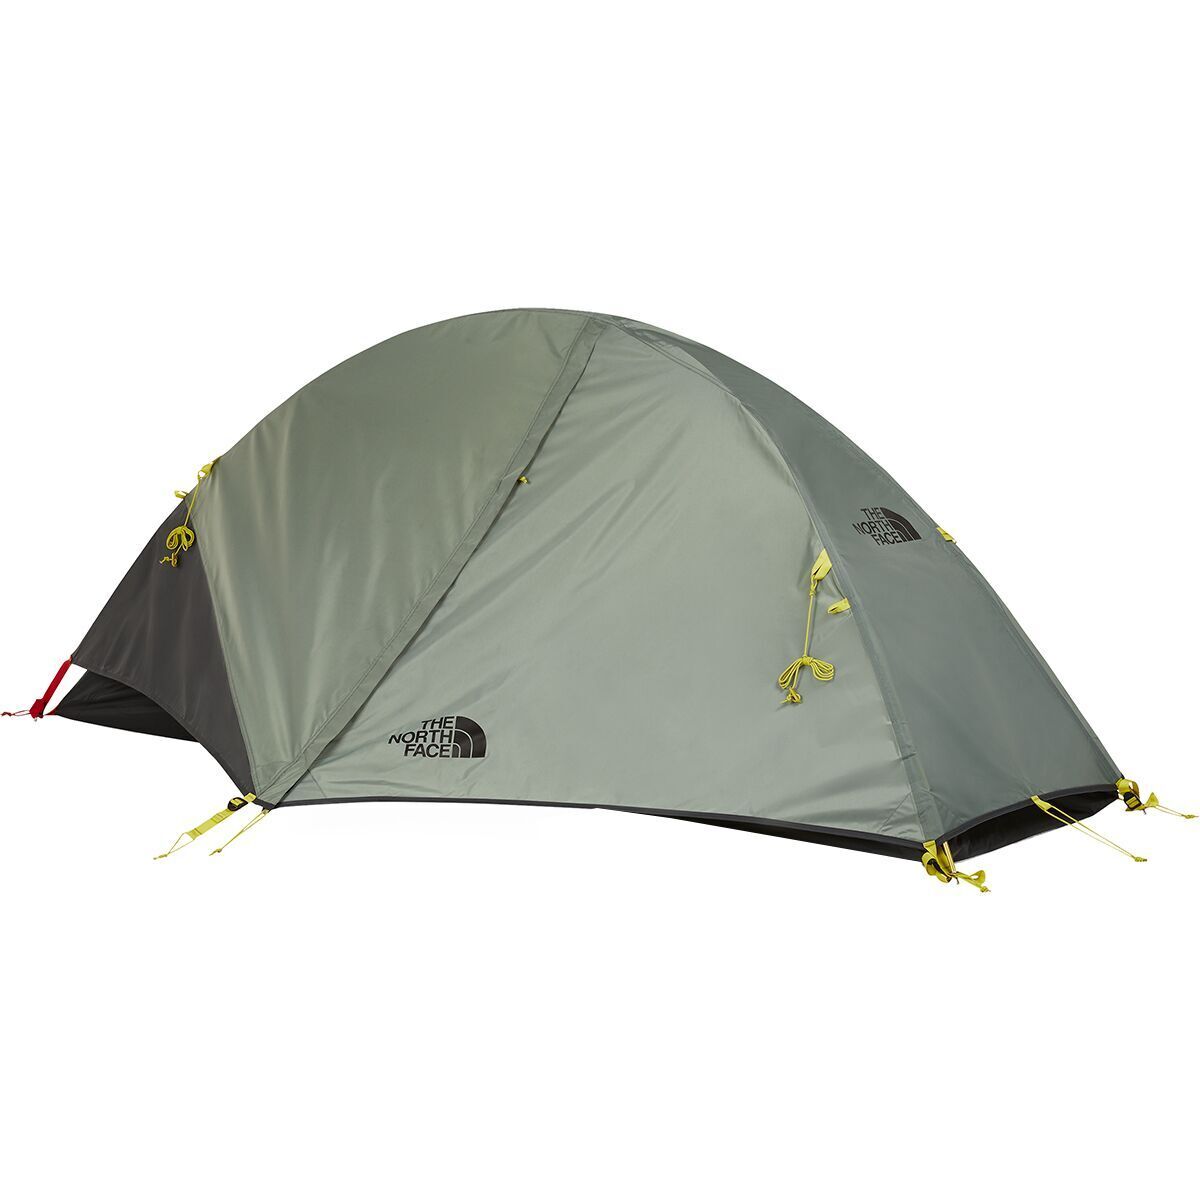 The North Face Stormbreak 1 Tent: 1-Person 3-Season - Hike & Camp